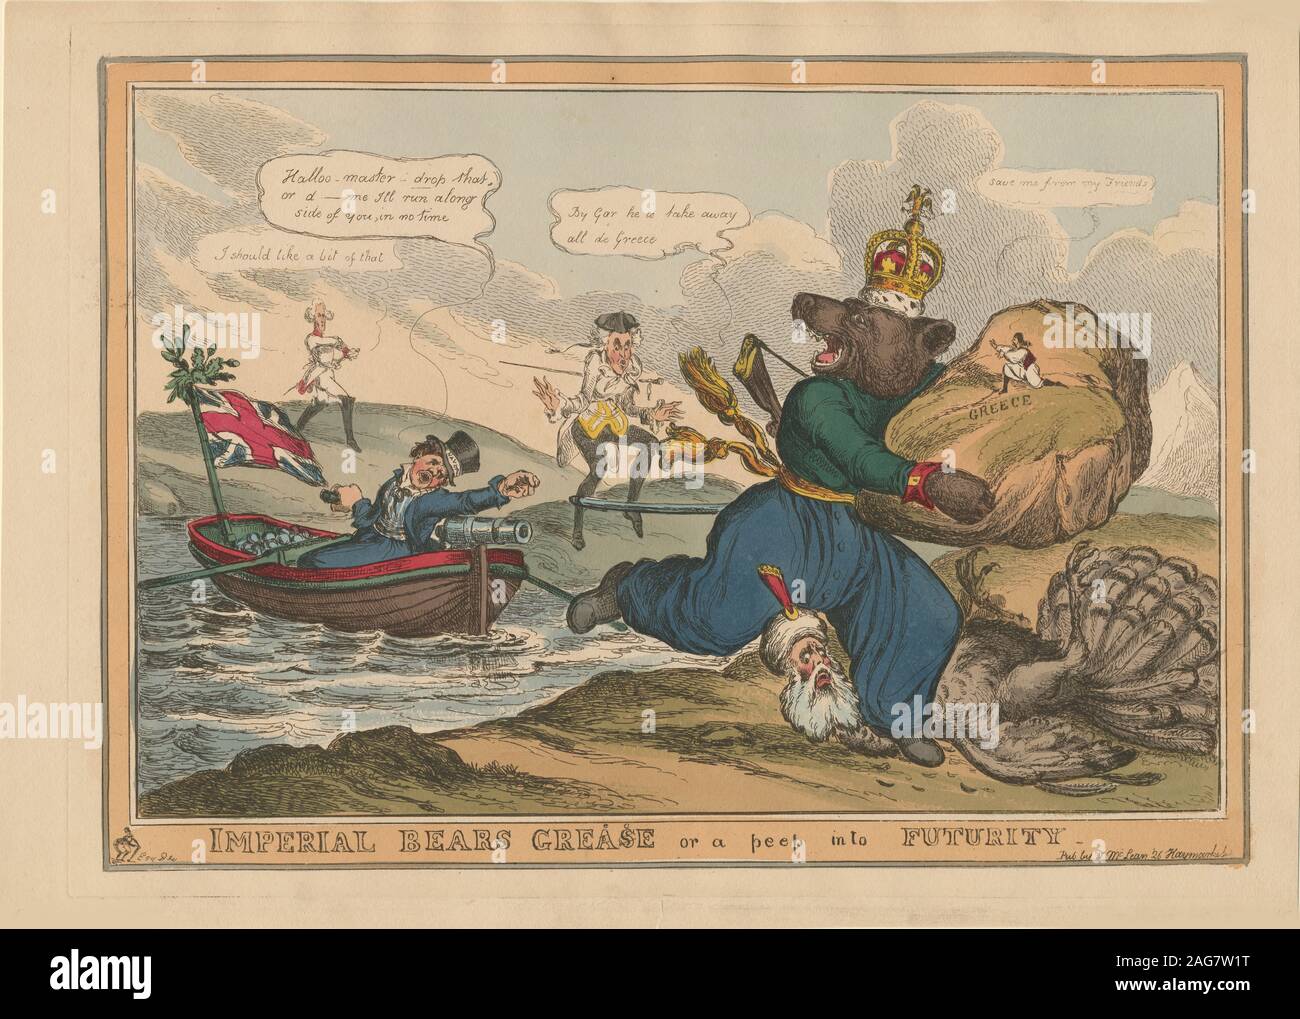 Imperial Bears Grease (Greece) or a peep into futurity. Caricature on the Russo-Turkish War, 1828-1829, 1828. Private Collection. Stock Photo